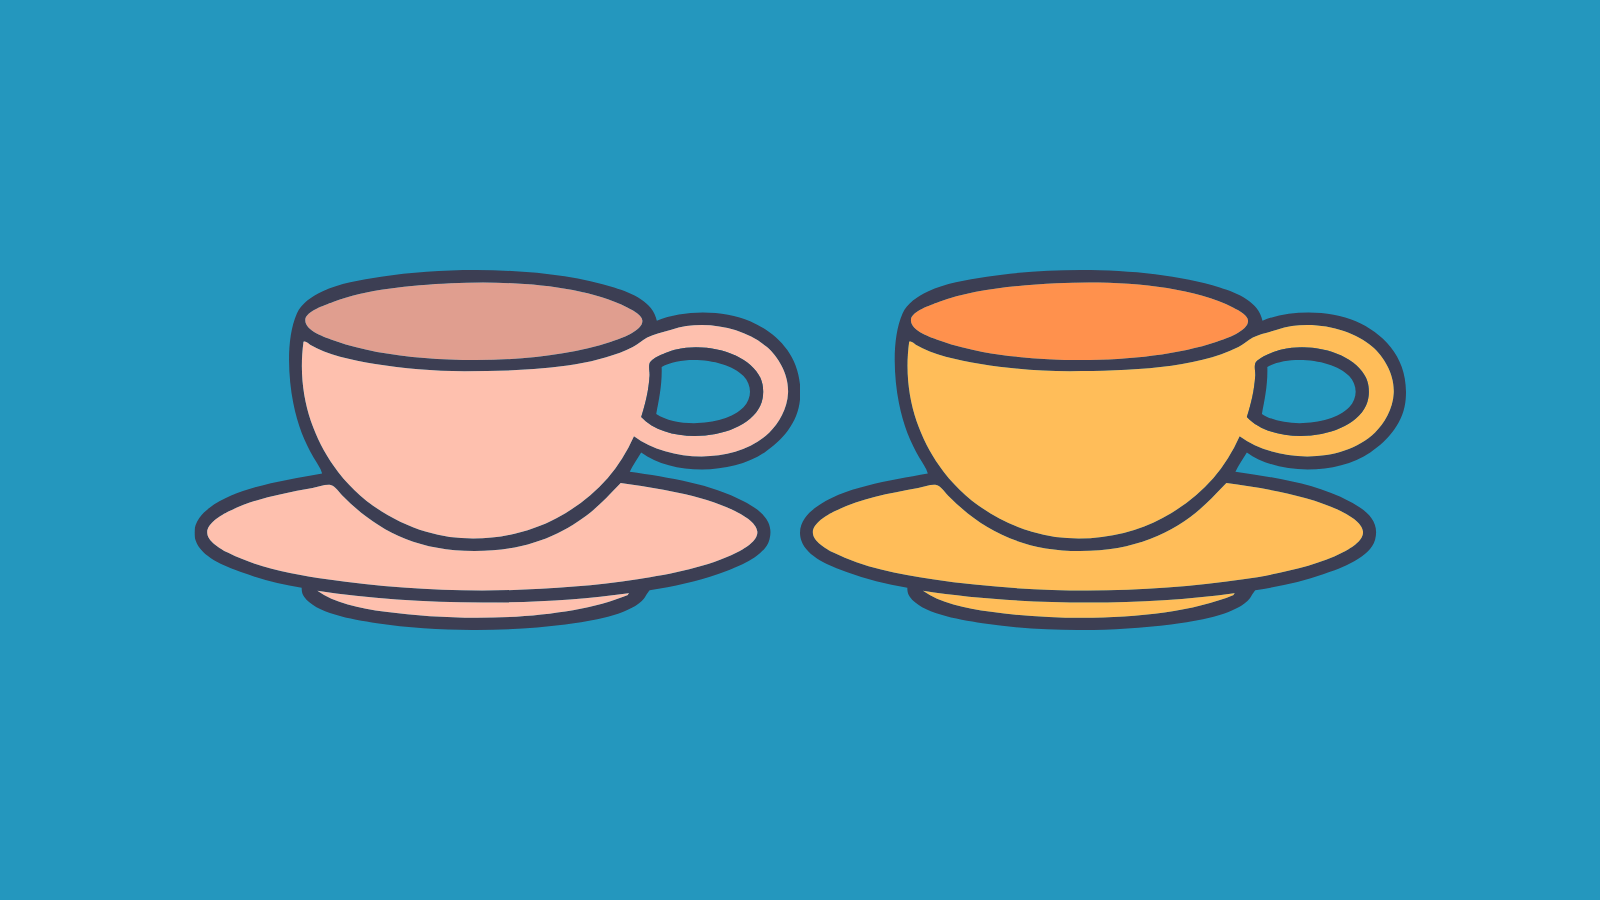 Two icons of the same teacup and saucer in different colors